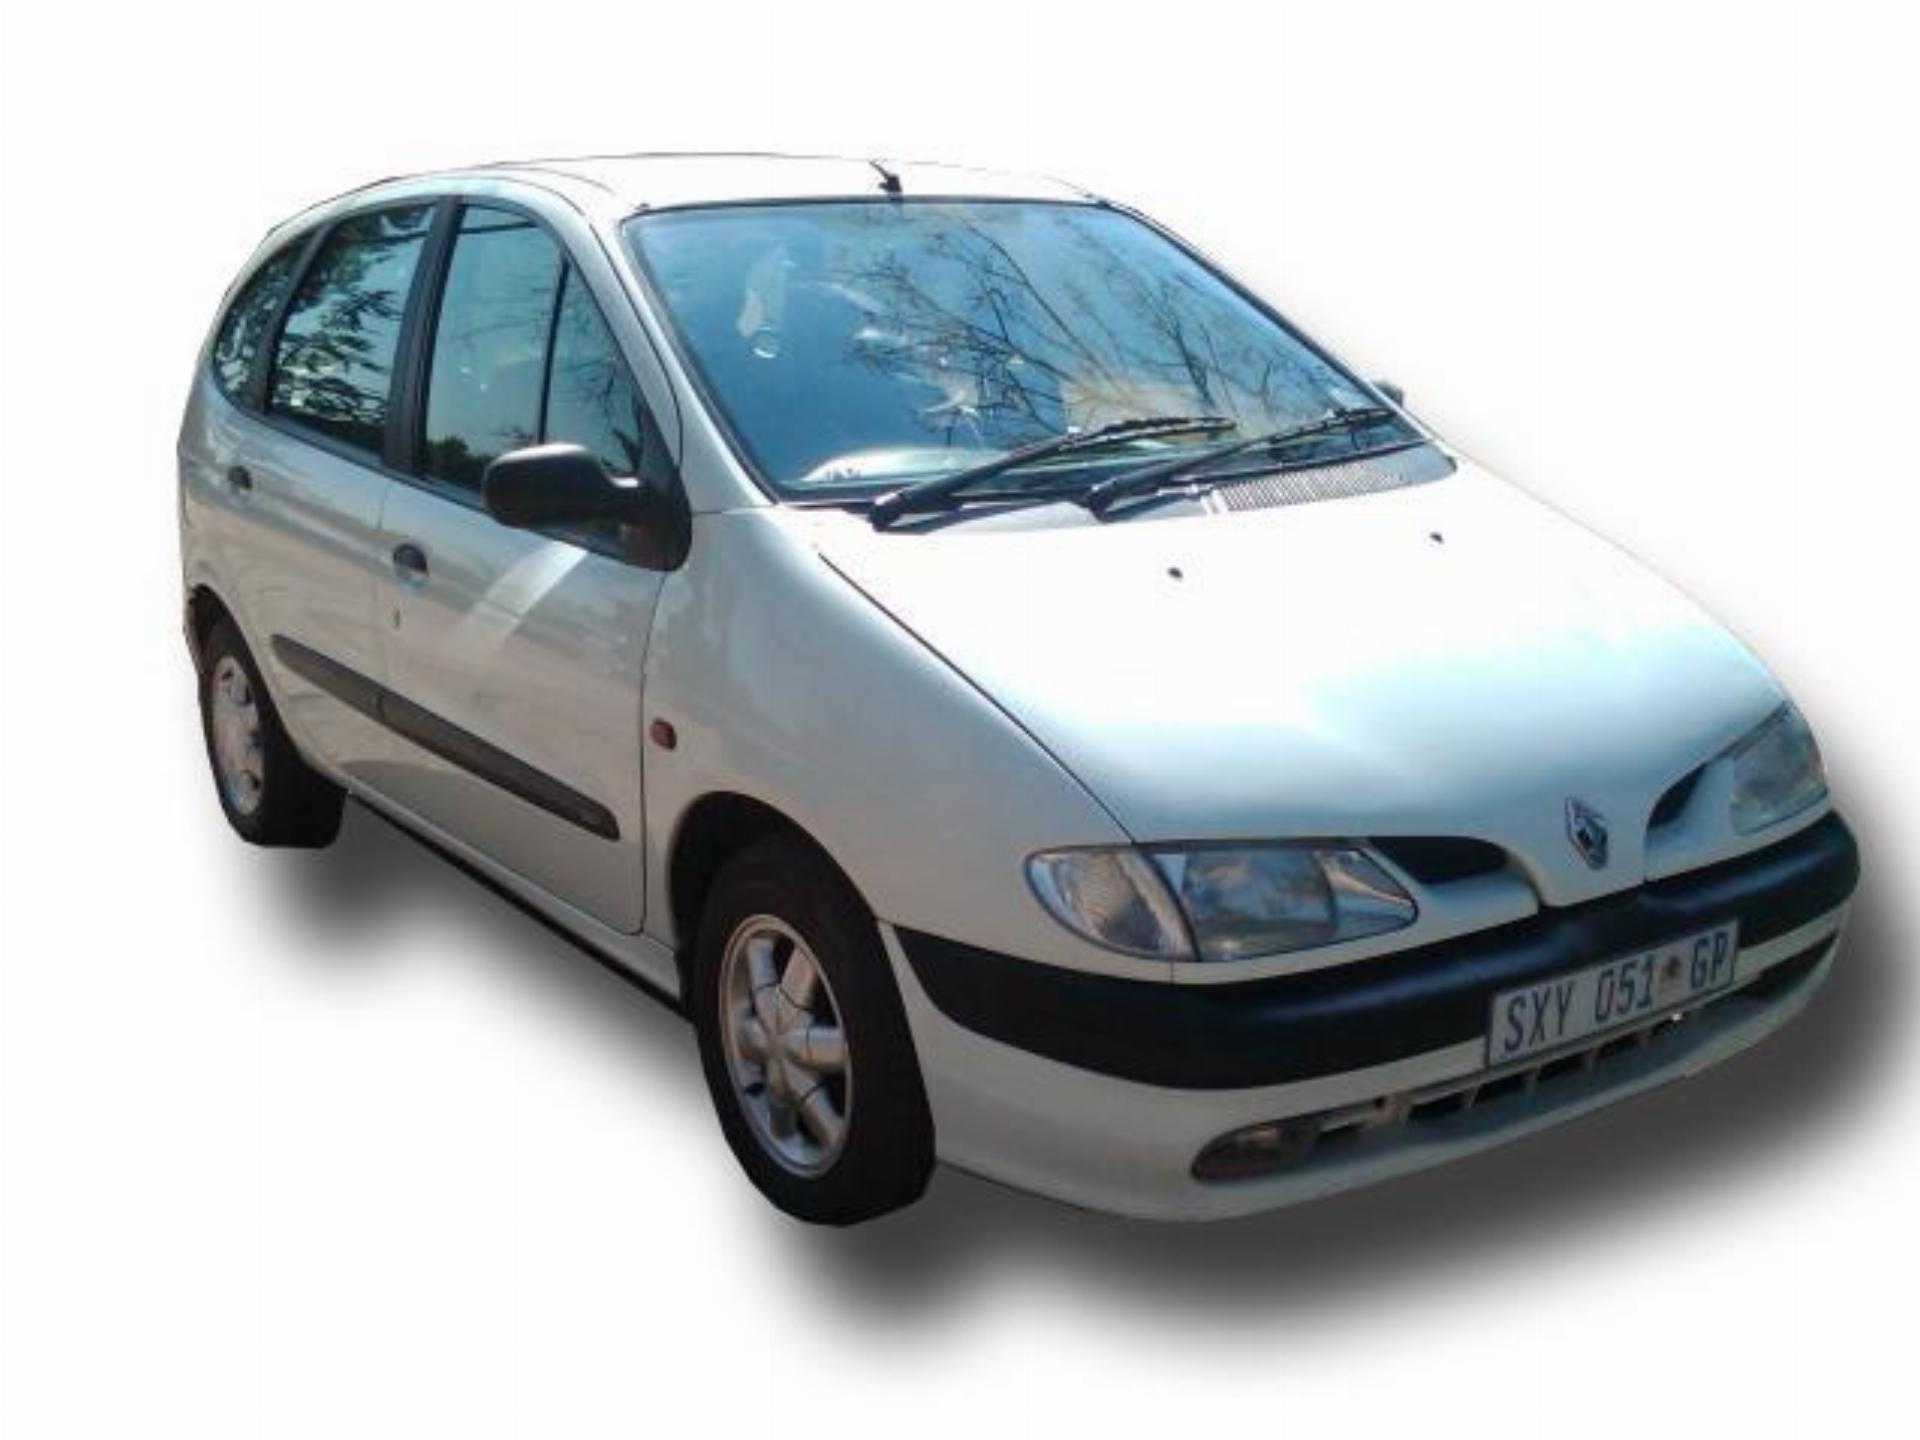 Used Renault Megane Scenic Scenic 2.0 Rxe 1999 on auction